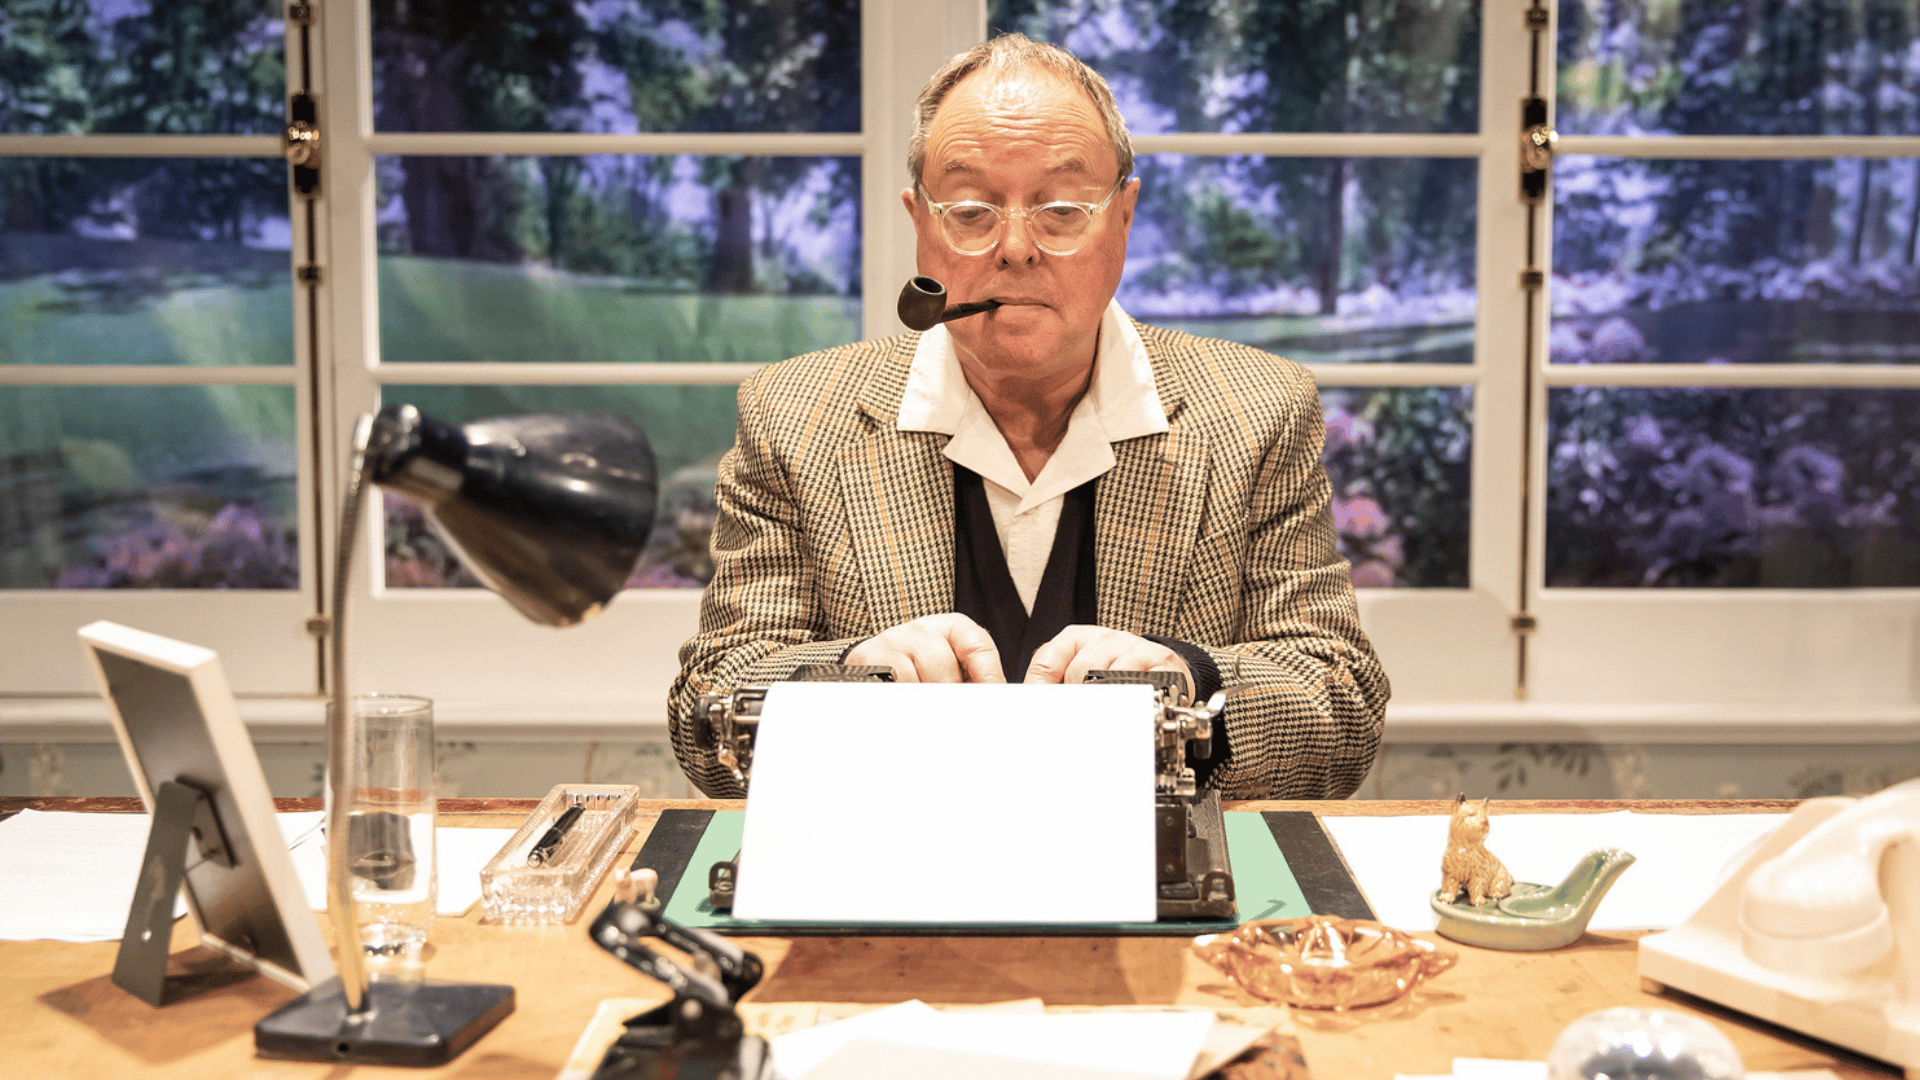 Robert Daws as PG Wodehouse sat at his desk typing into a typewriter. He has a smoking pipe in his mouth and he is wearing a tweed jacket with a white shirt and black waistcoat underneath. His desk contains a lamp, telephone, picture frame and various trinkets. Behind him is a window with a nice view of trees, flowers and grounds.